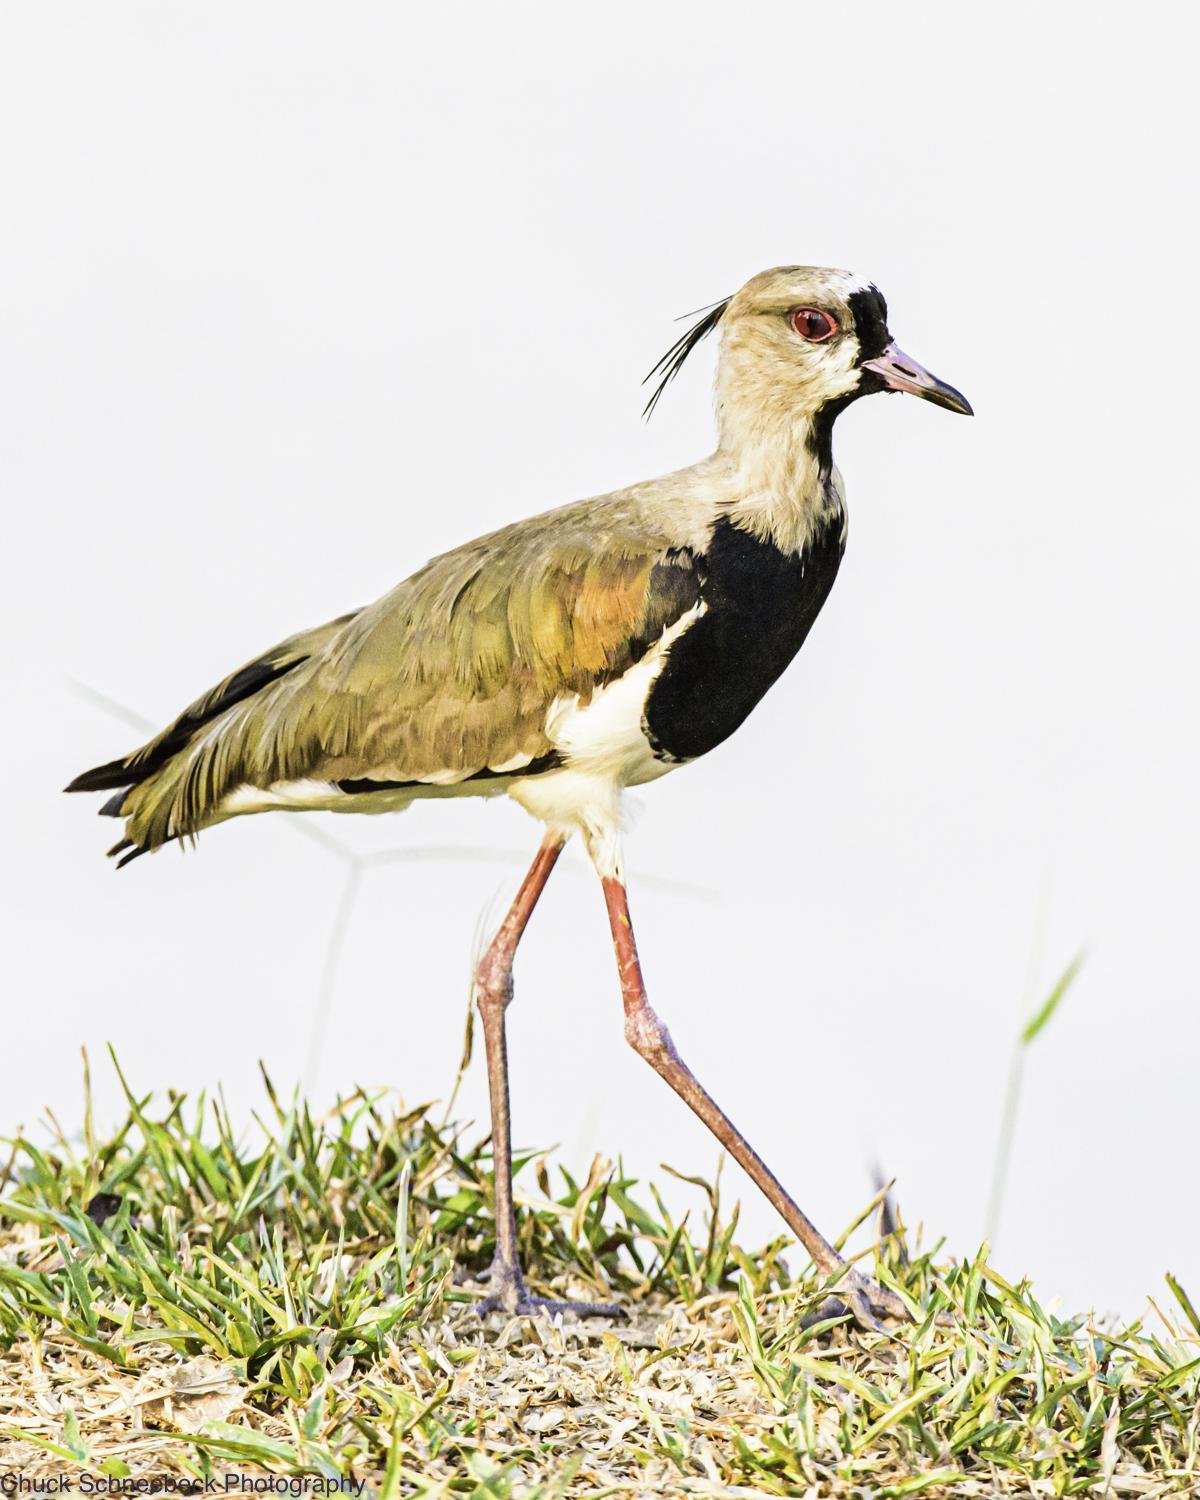 Southern Lapwing Photo by Chuck  Schneebeck